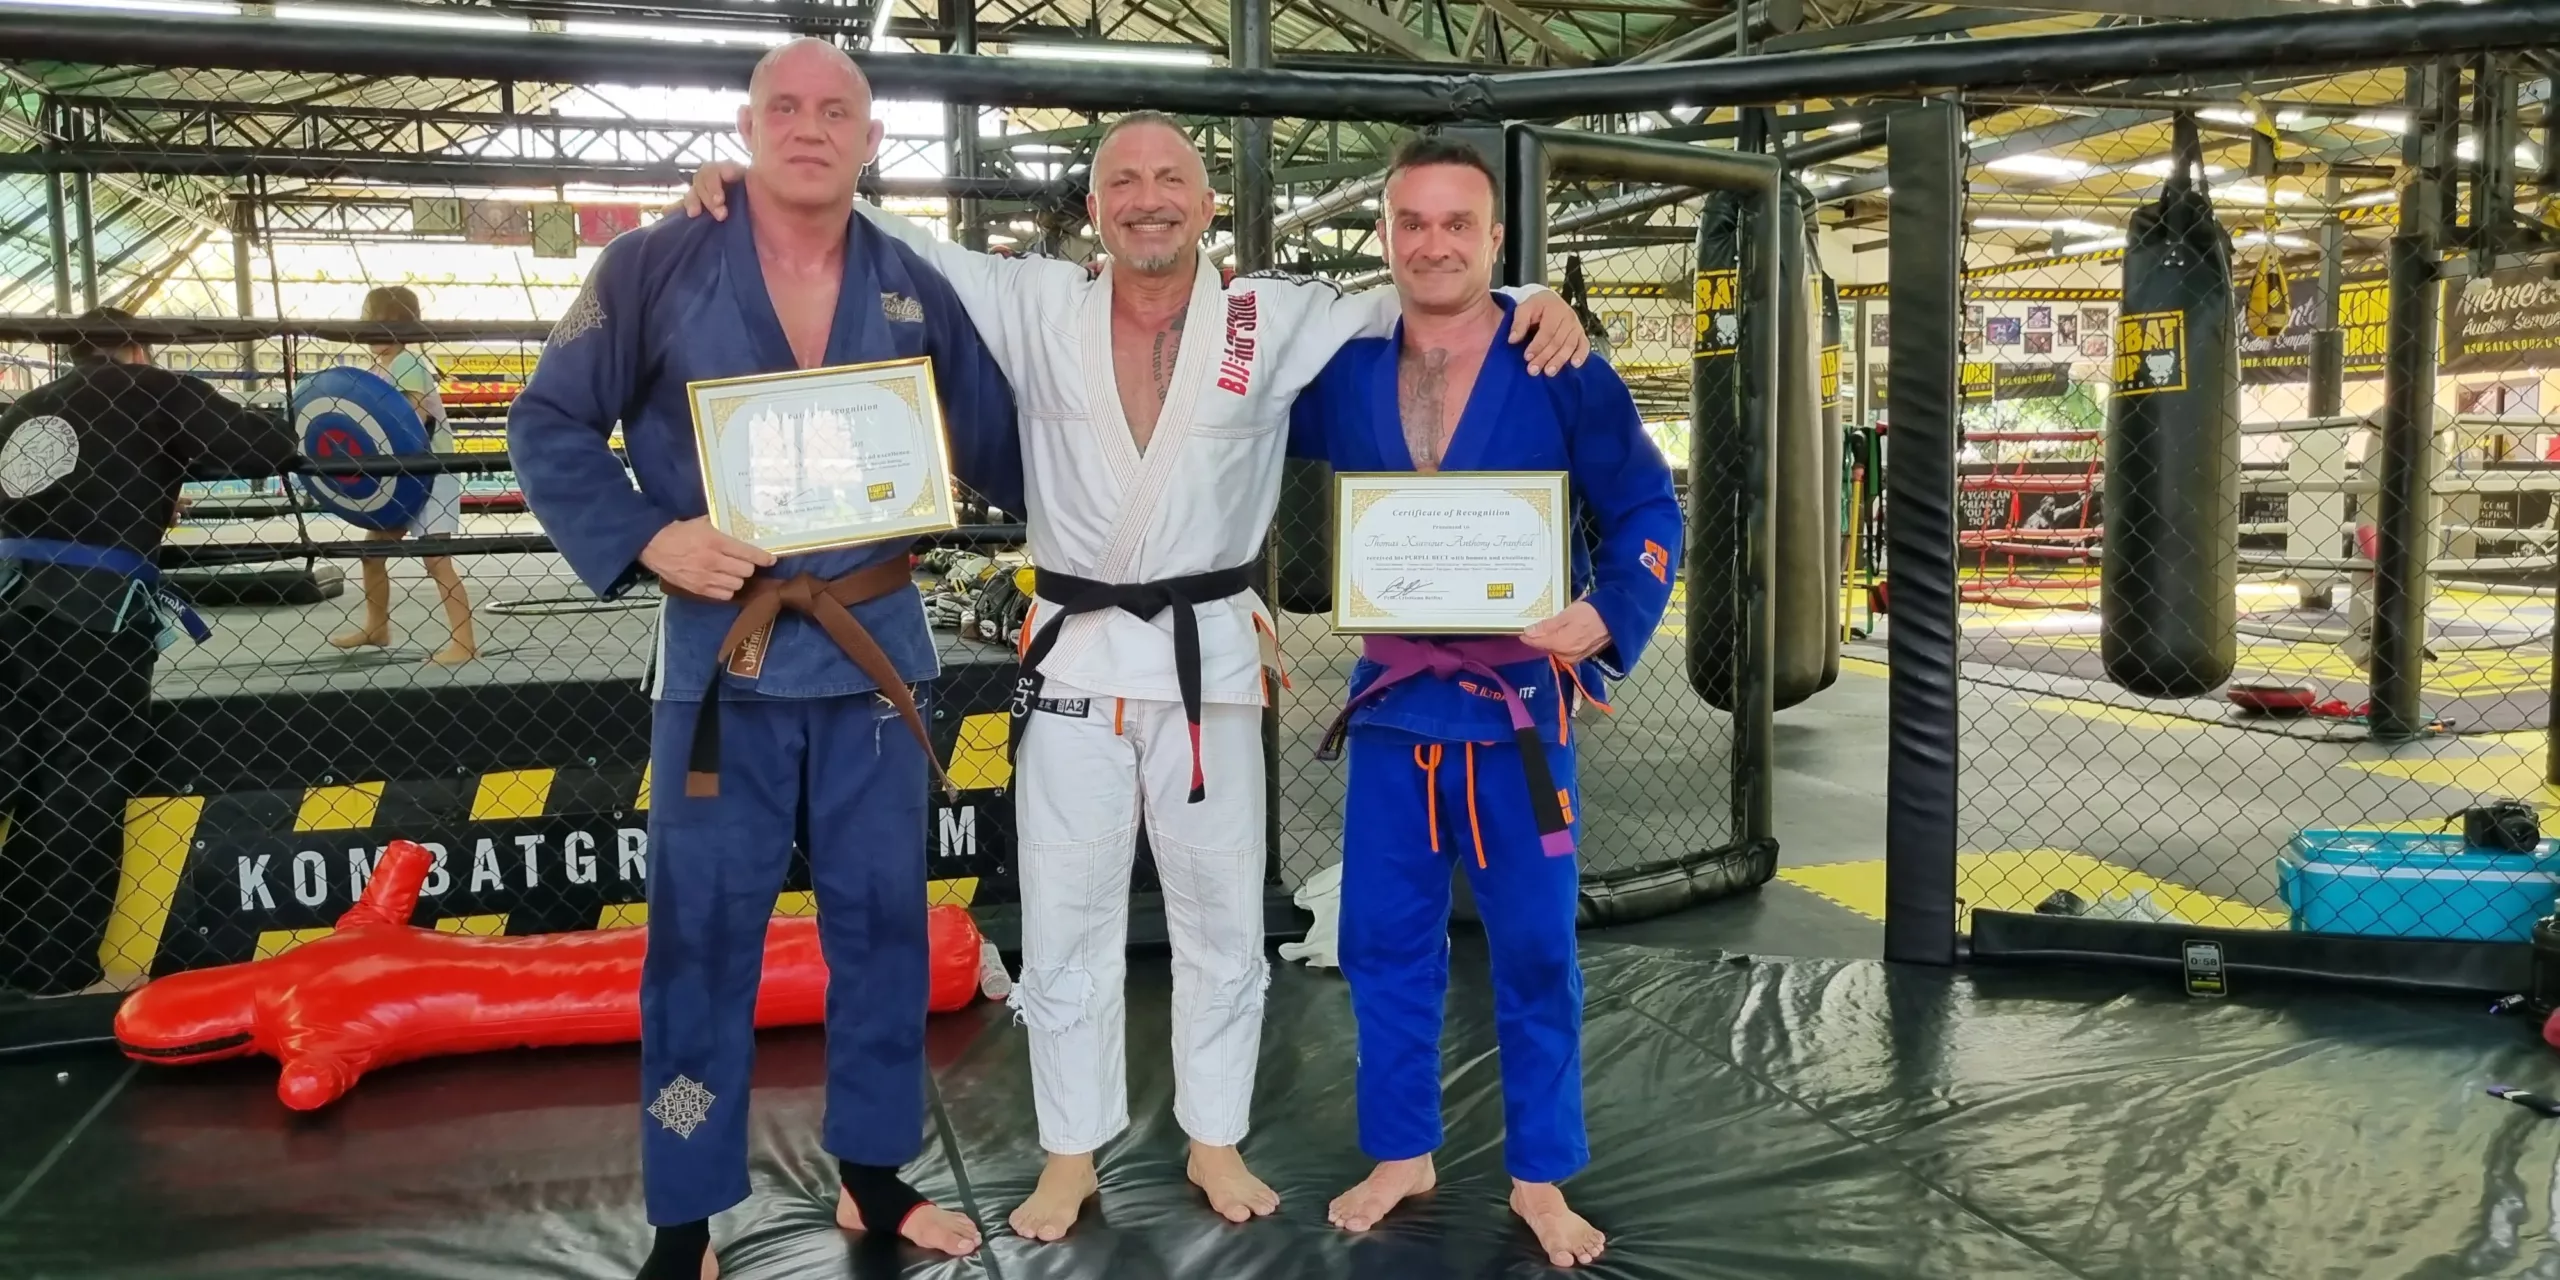 Three Brazilian Jiu-Jitsu students smiling proudly in the dojo, holding their promotion certificates and wearing their gis with newly earned belts, celebrating their progress and dedication to the martial art.